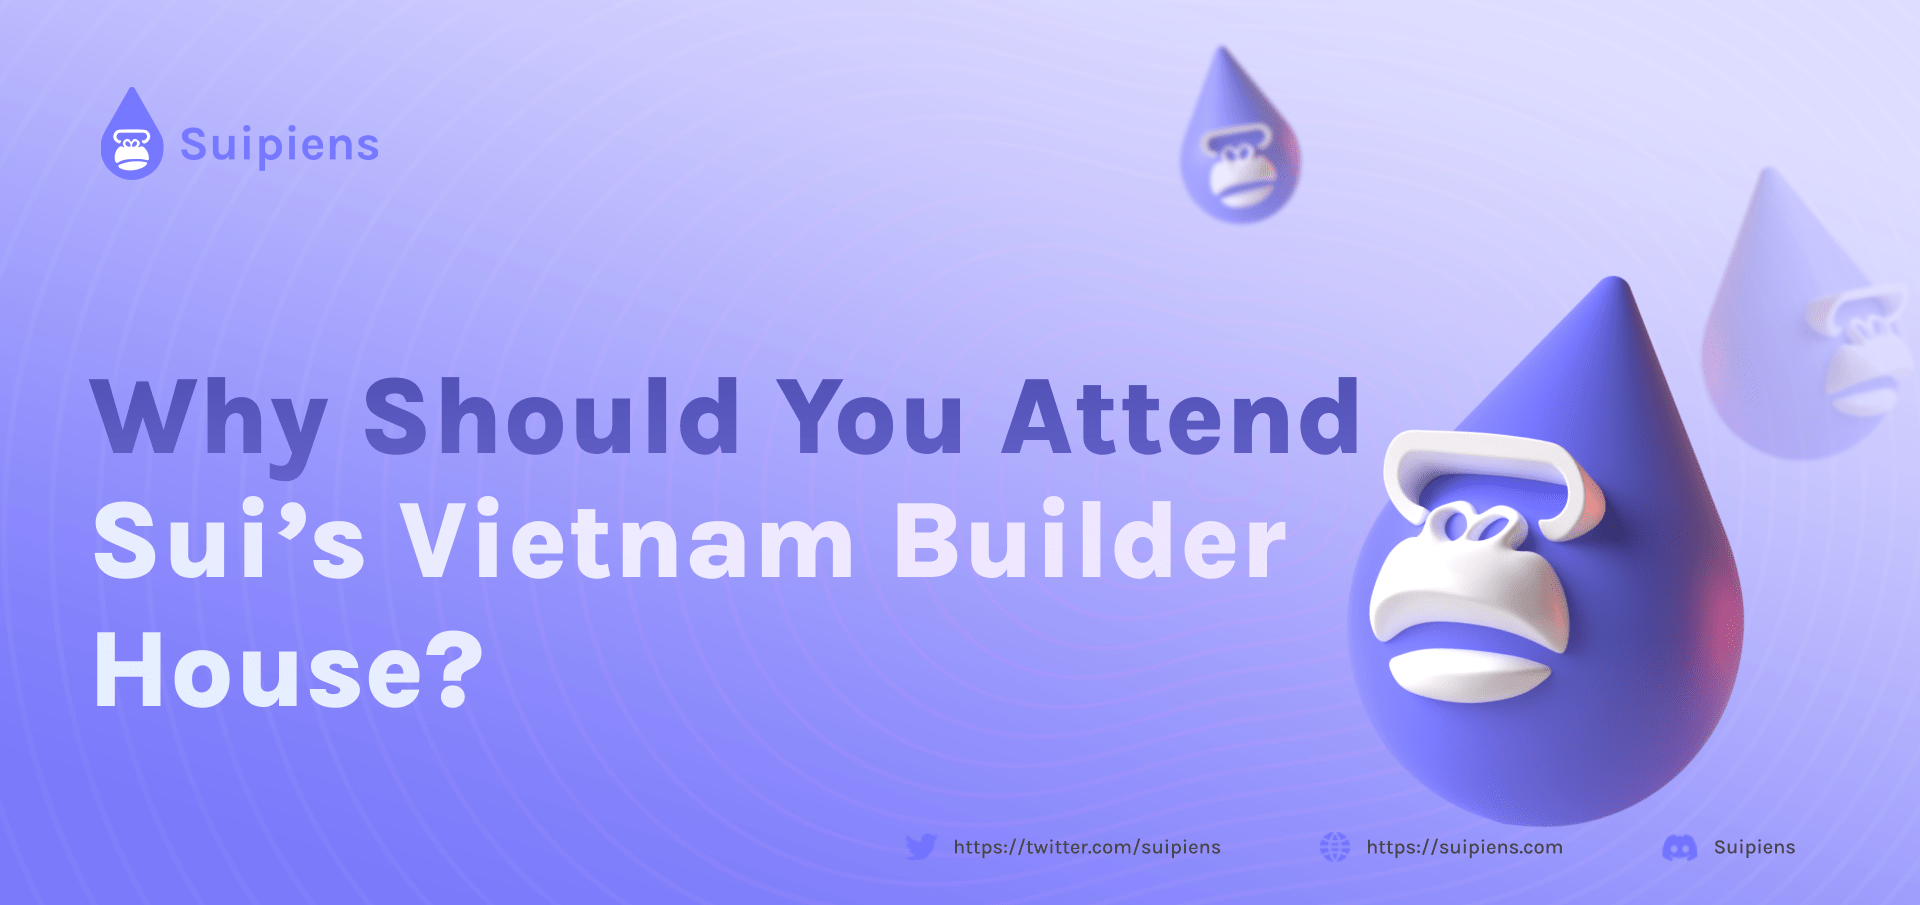 Why Should You Attend Sui’s Vietnam Builder House?